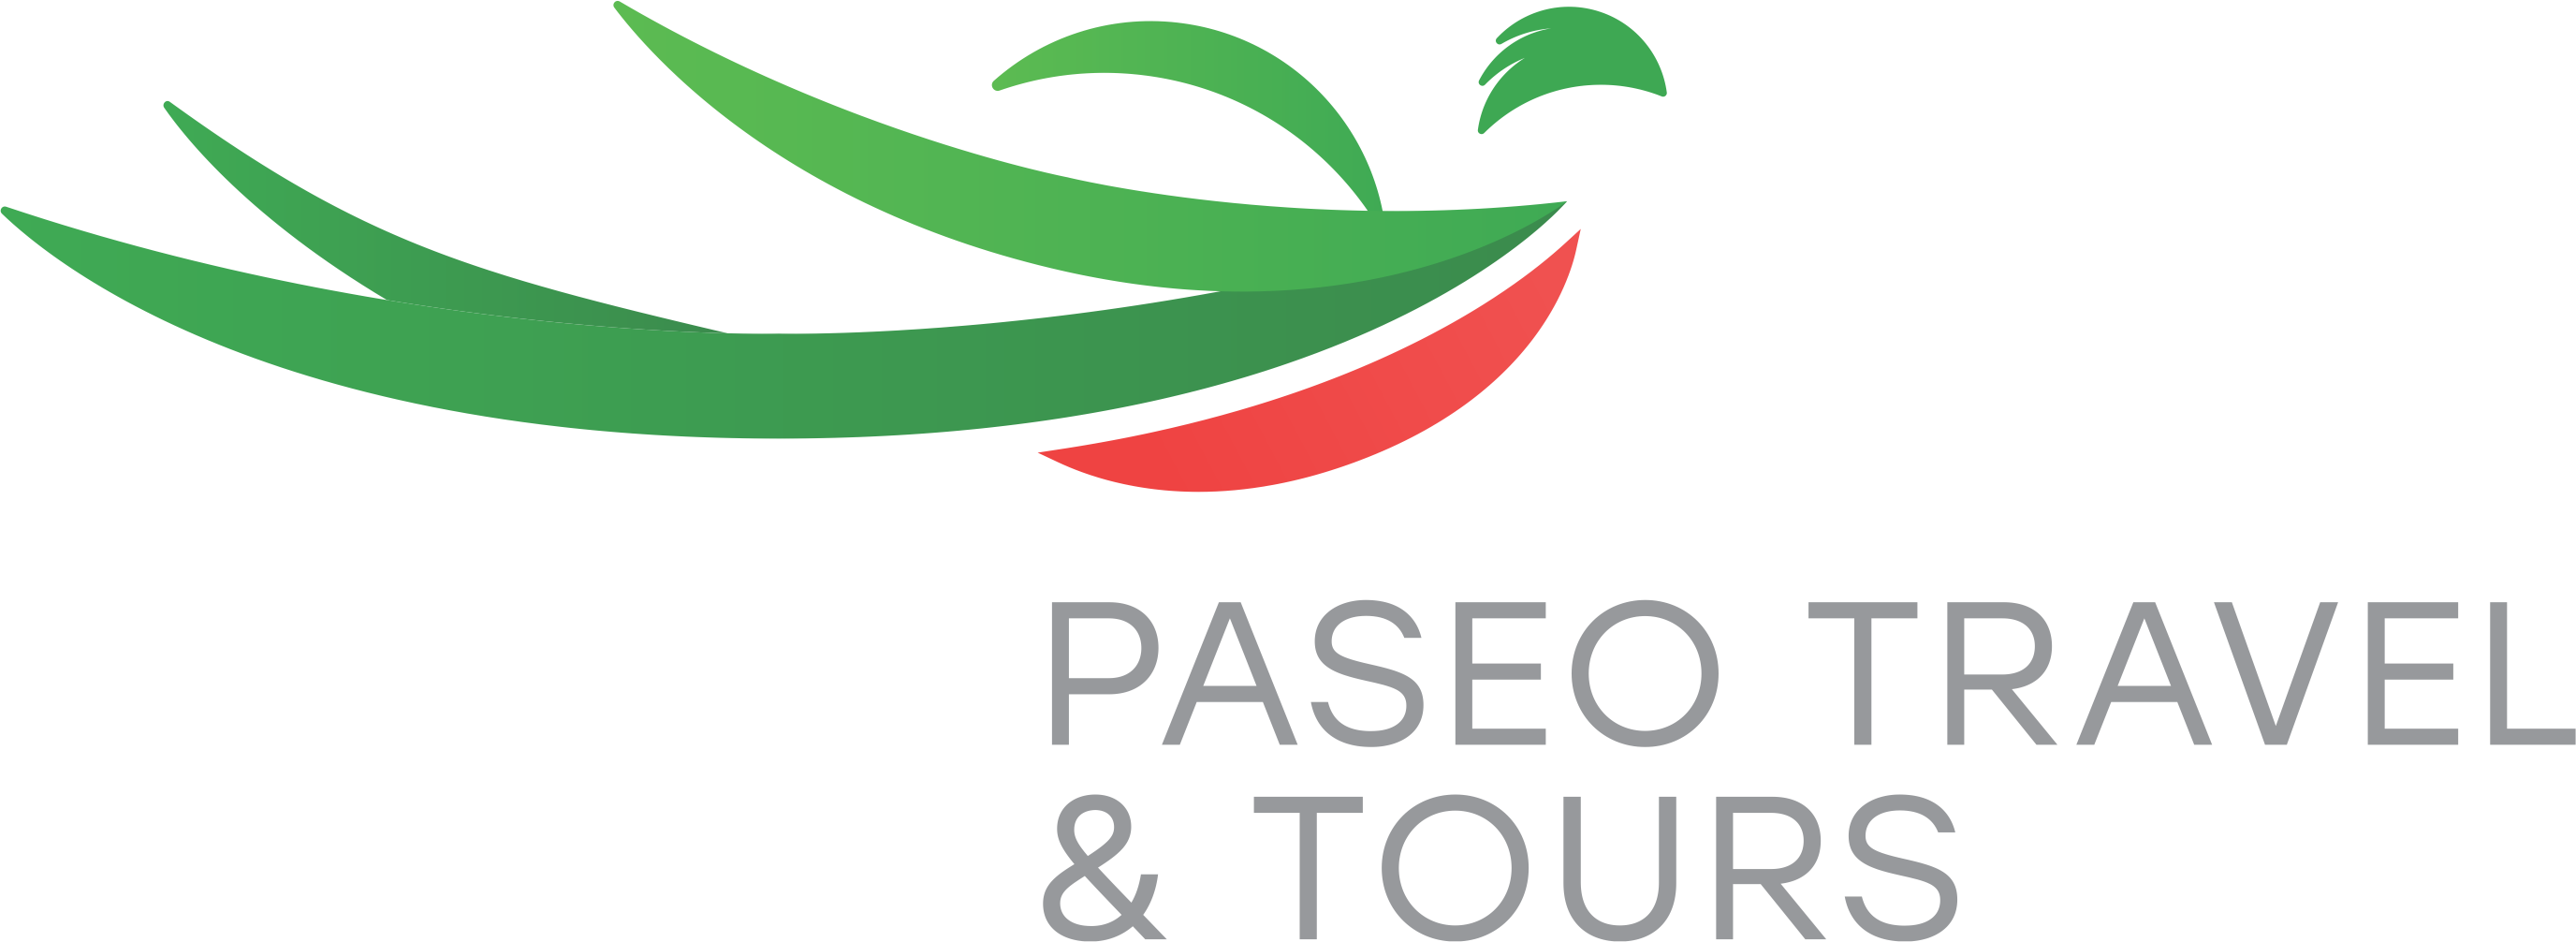 Paseo Travel and Tours Inc